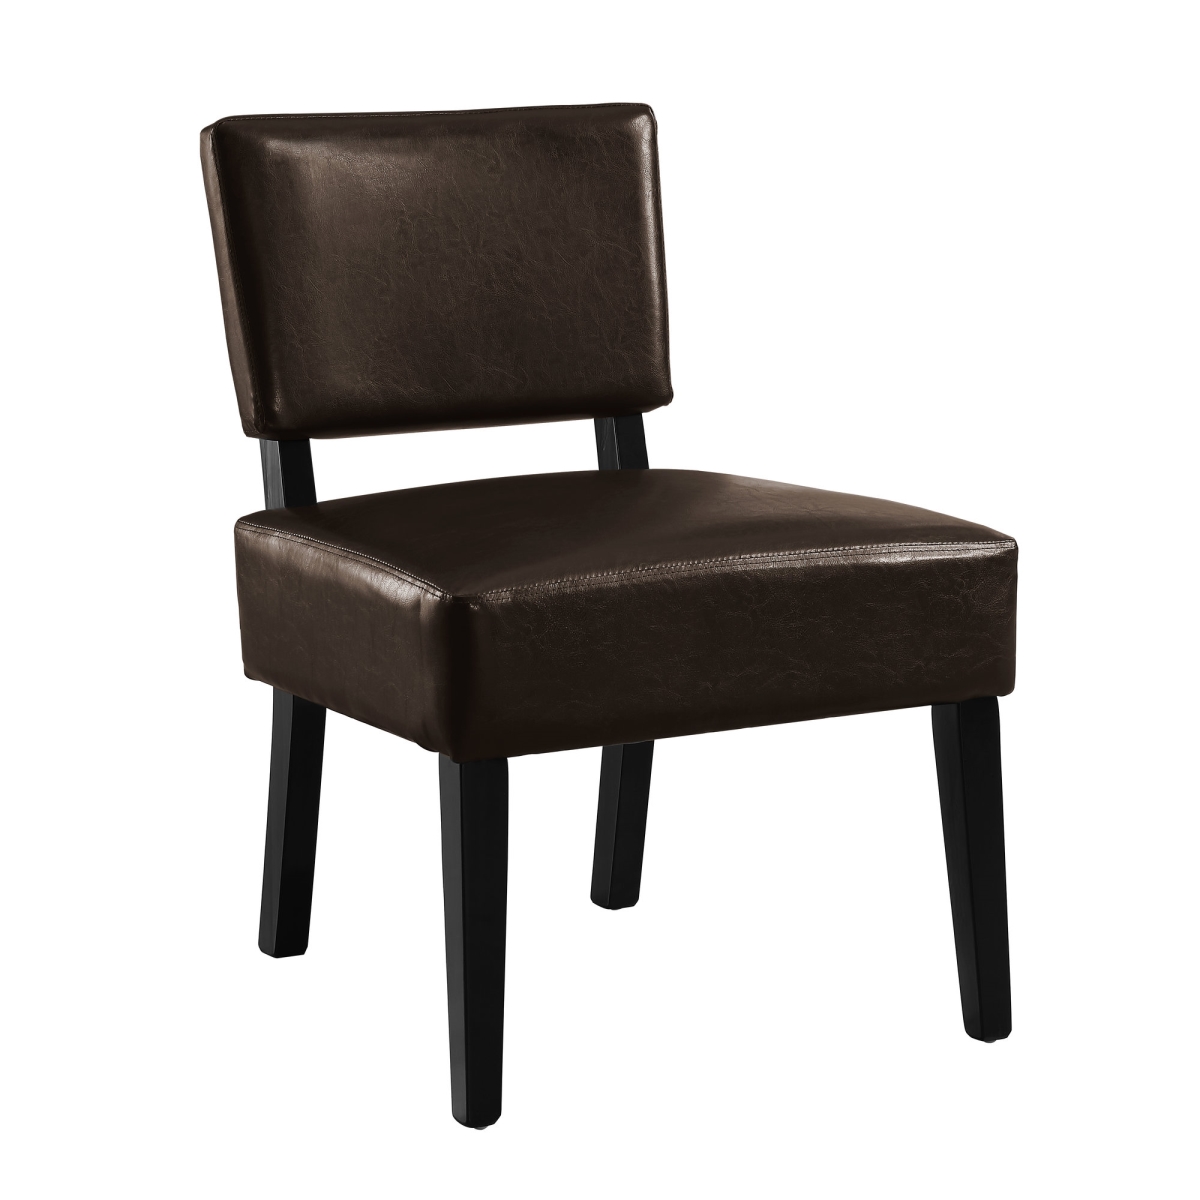 Accent Chair, Dark Brown Leather, Look Fabric